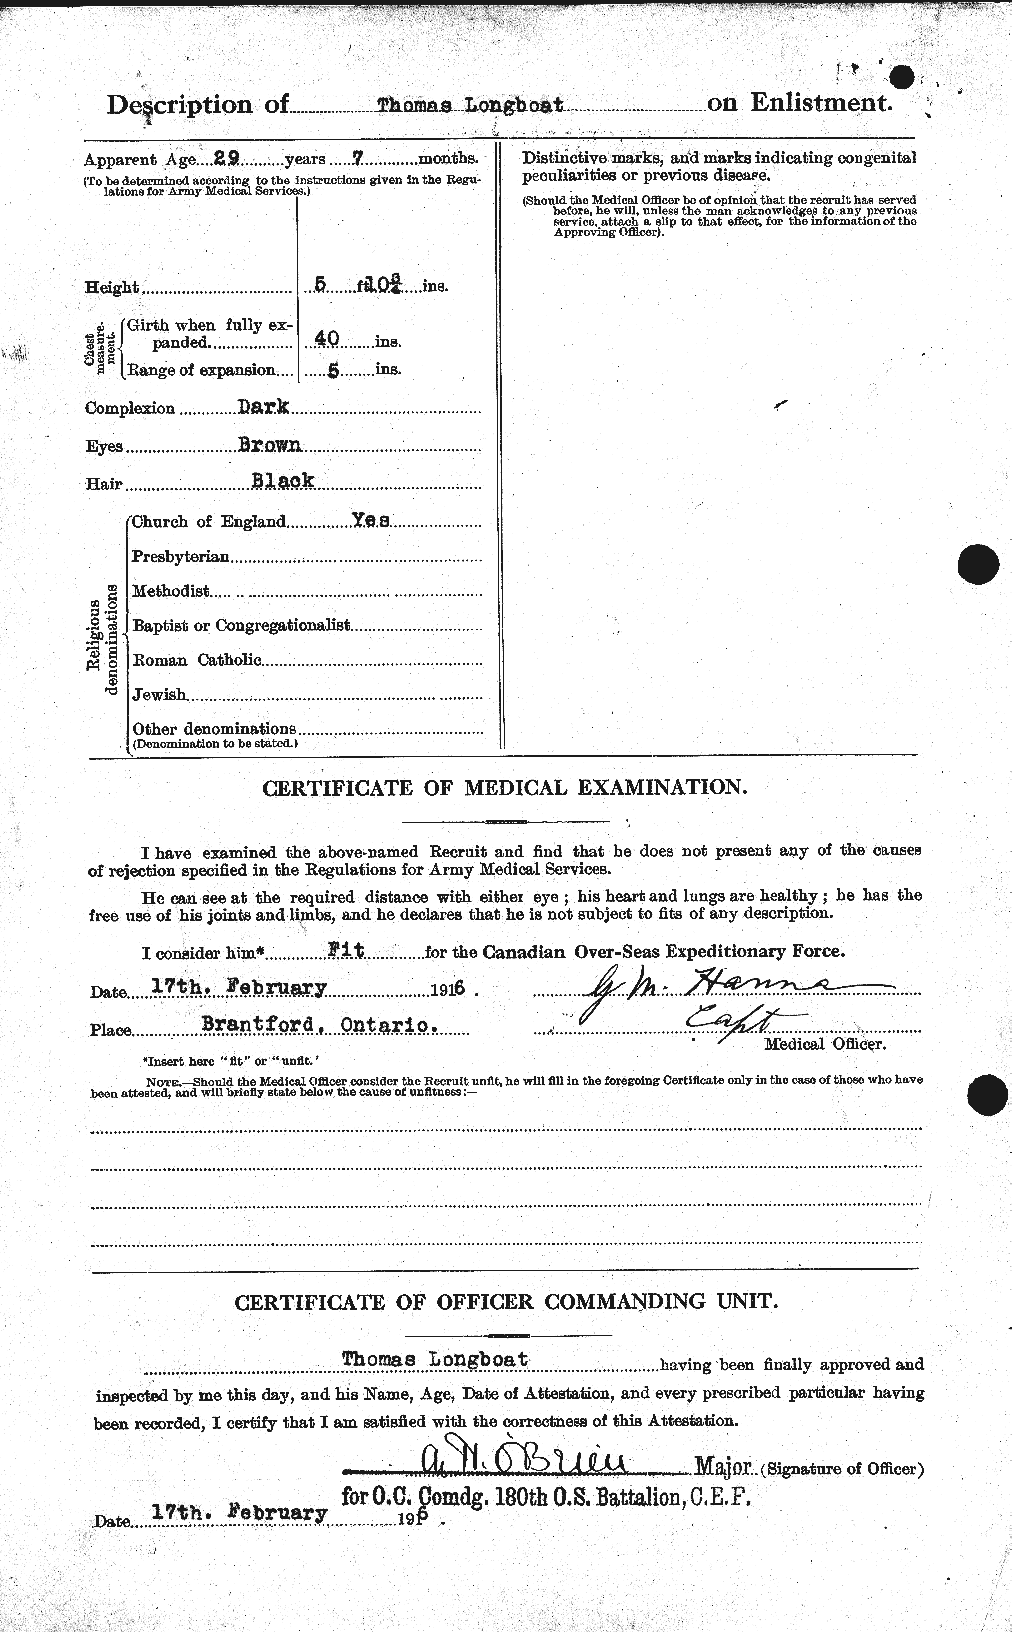 Personnel Records of the First World War - CEF 470942b